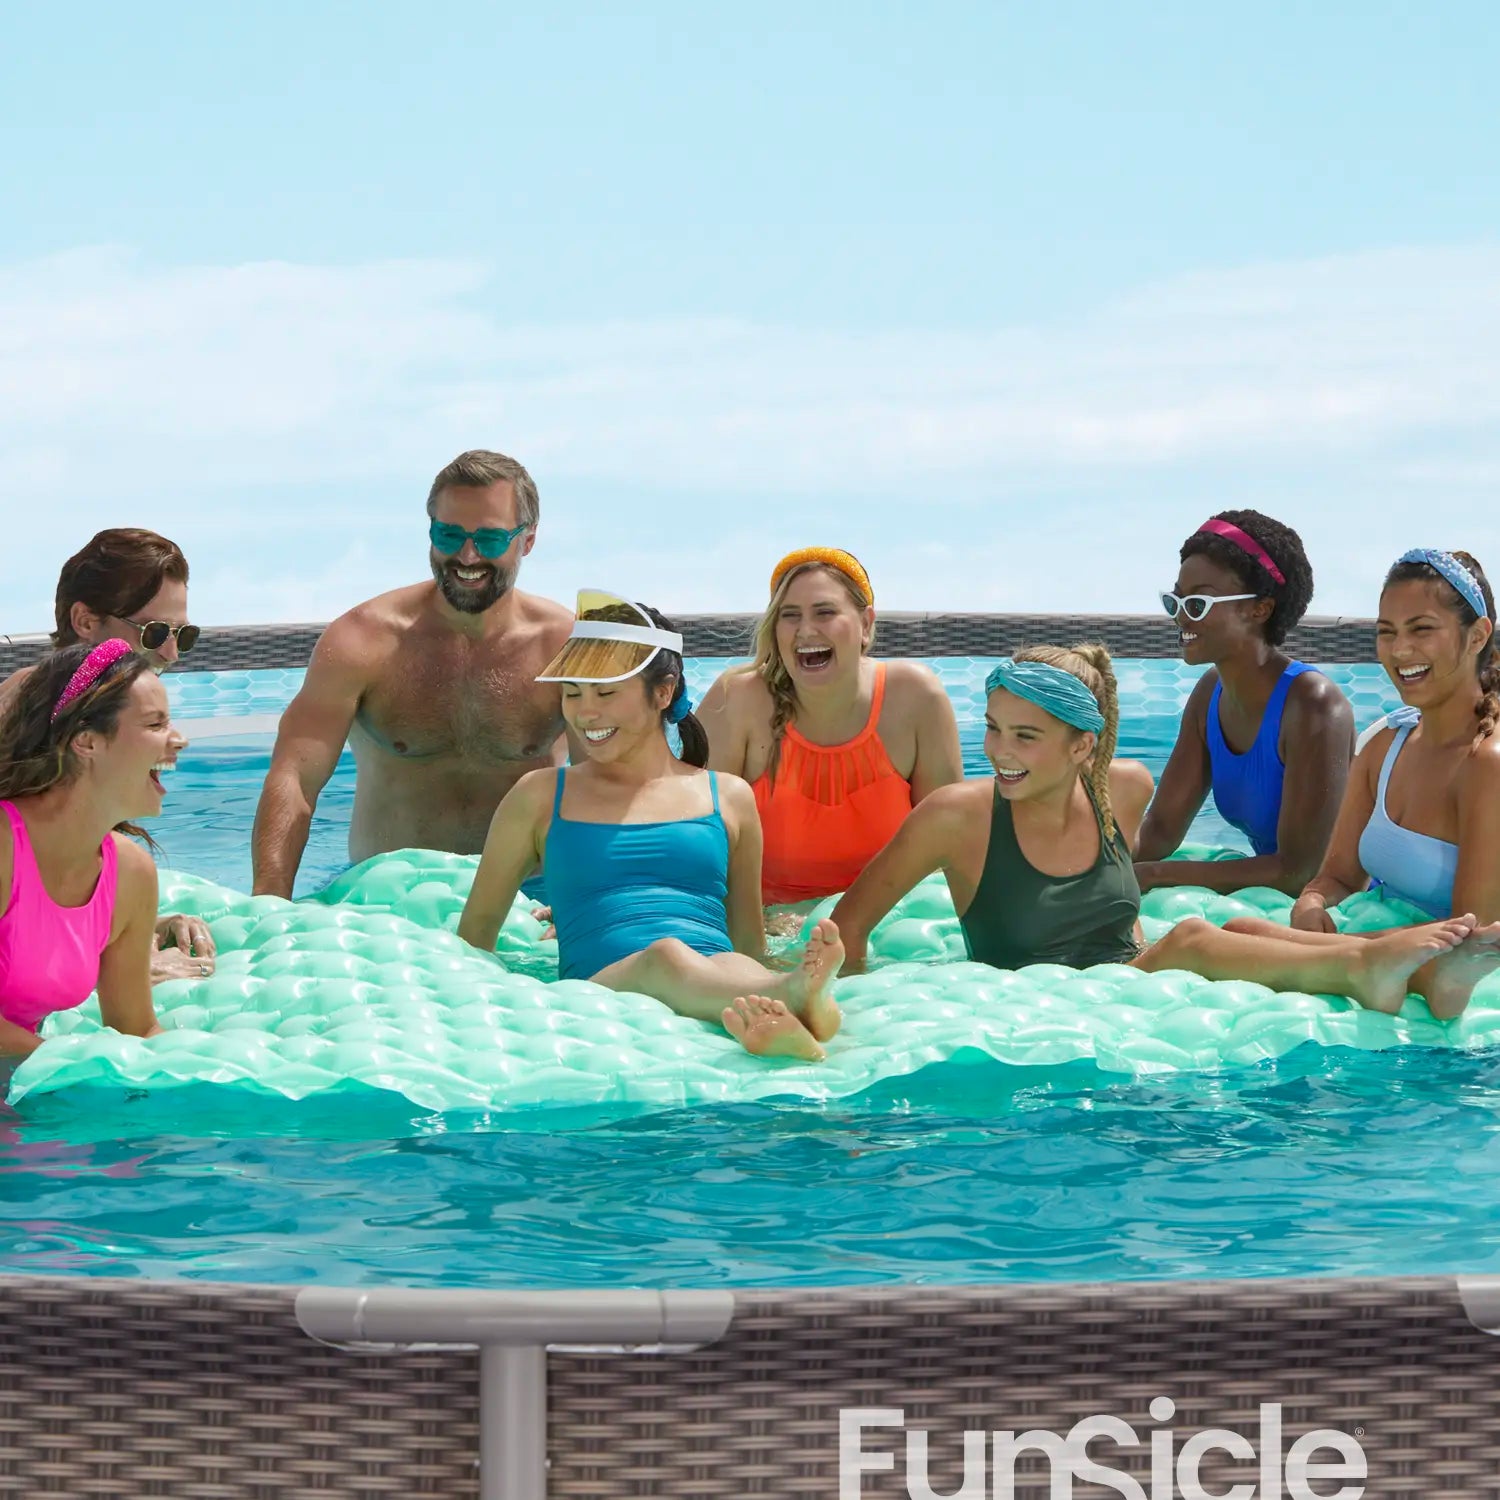 Funsicle 18 ft Oasis Designer Pool - Dark Double Rattan close up view with people